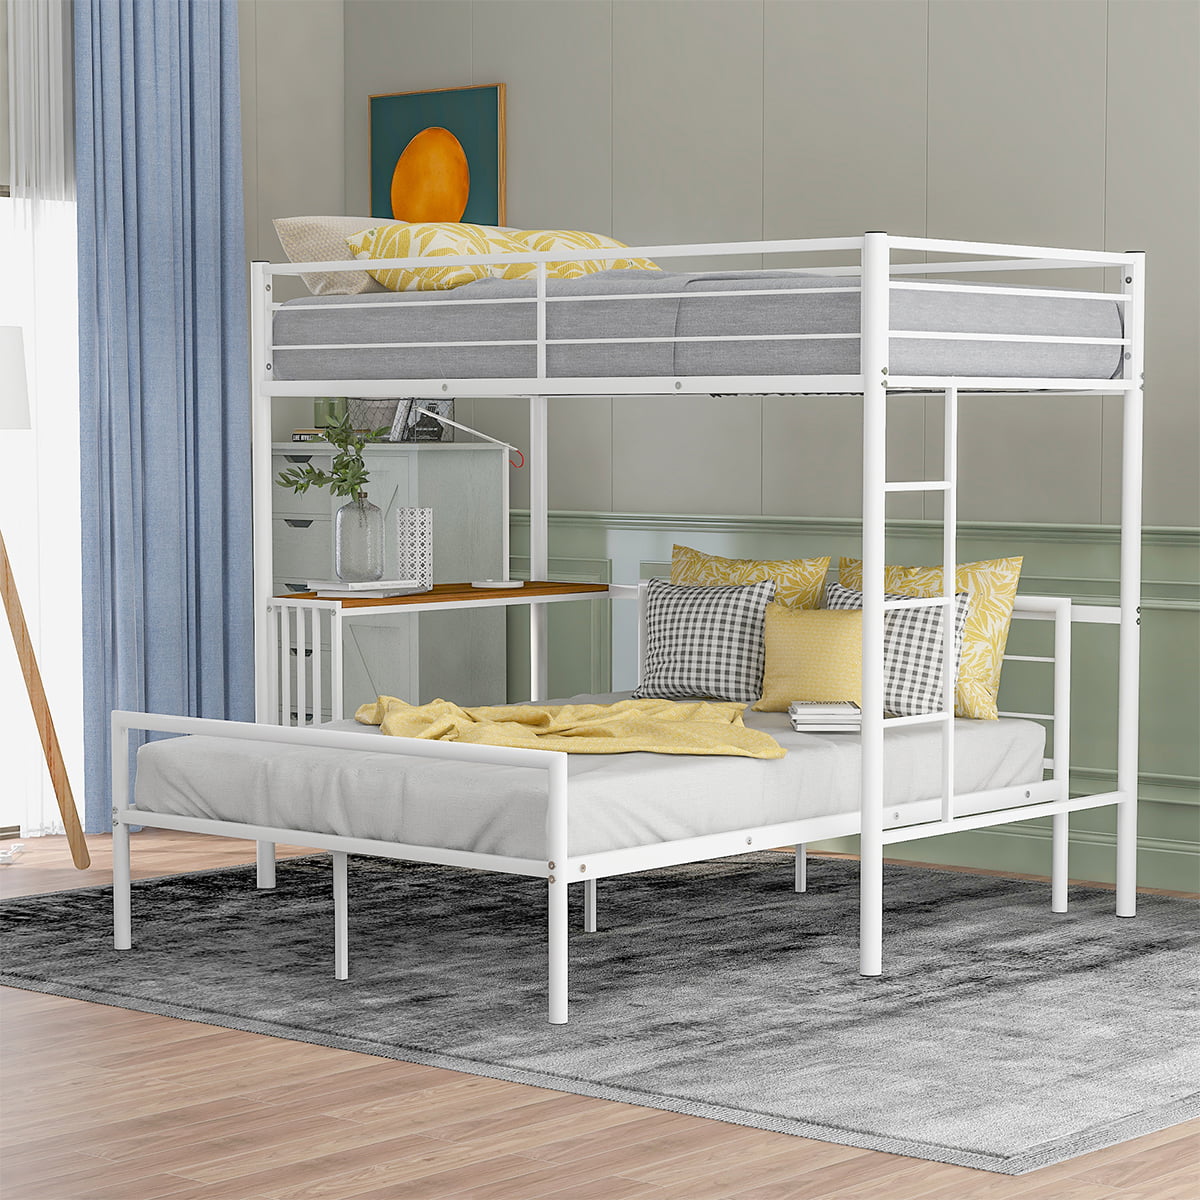 bunk bed with study